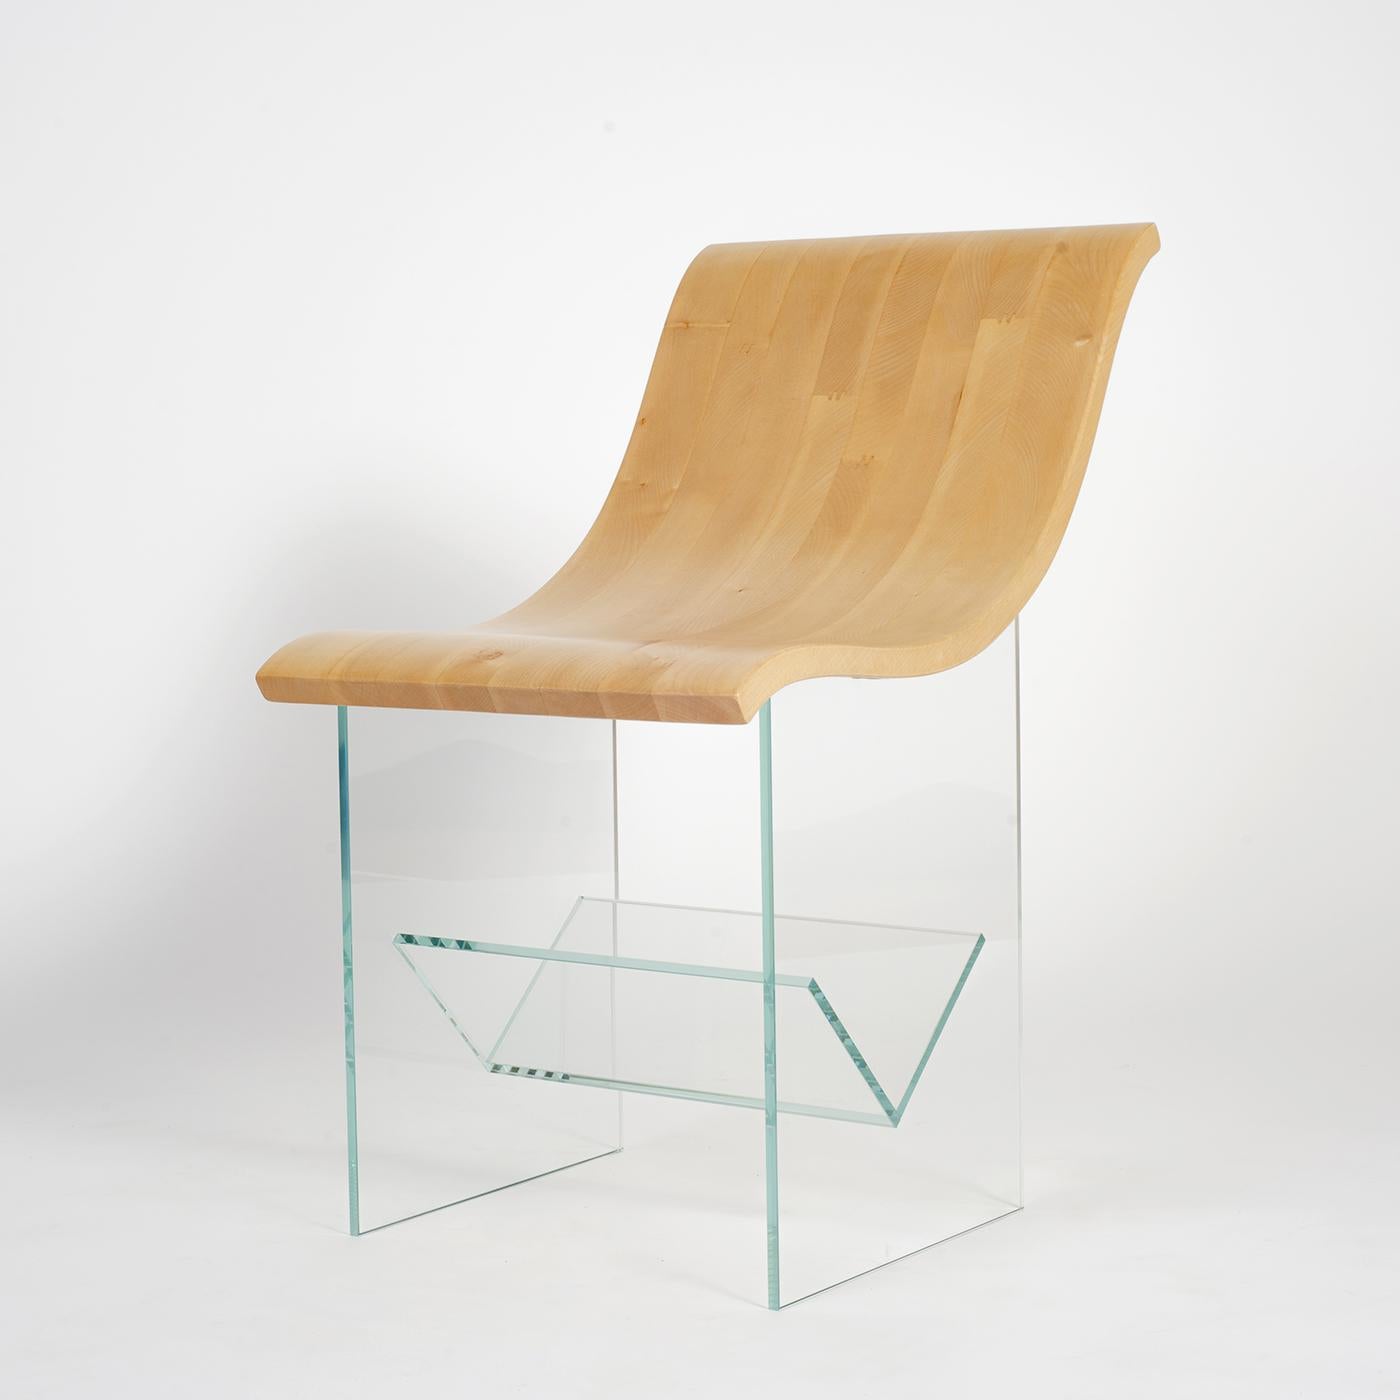 This Classic chair is characterized by exceptional craftsmanship and modern aesthetic balance. The chair frame, made of maple wood with a light grain, effortlessly flows from the curved architectural back to the wide seat and geometric, glass legs.